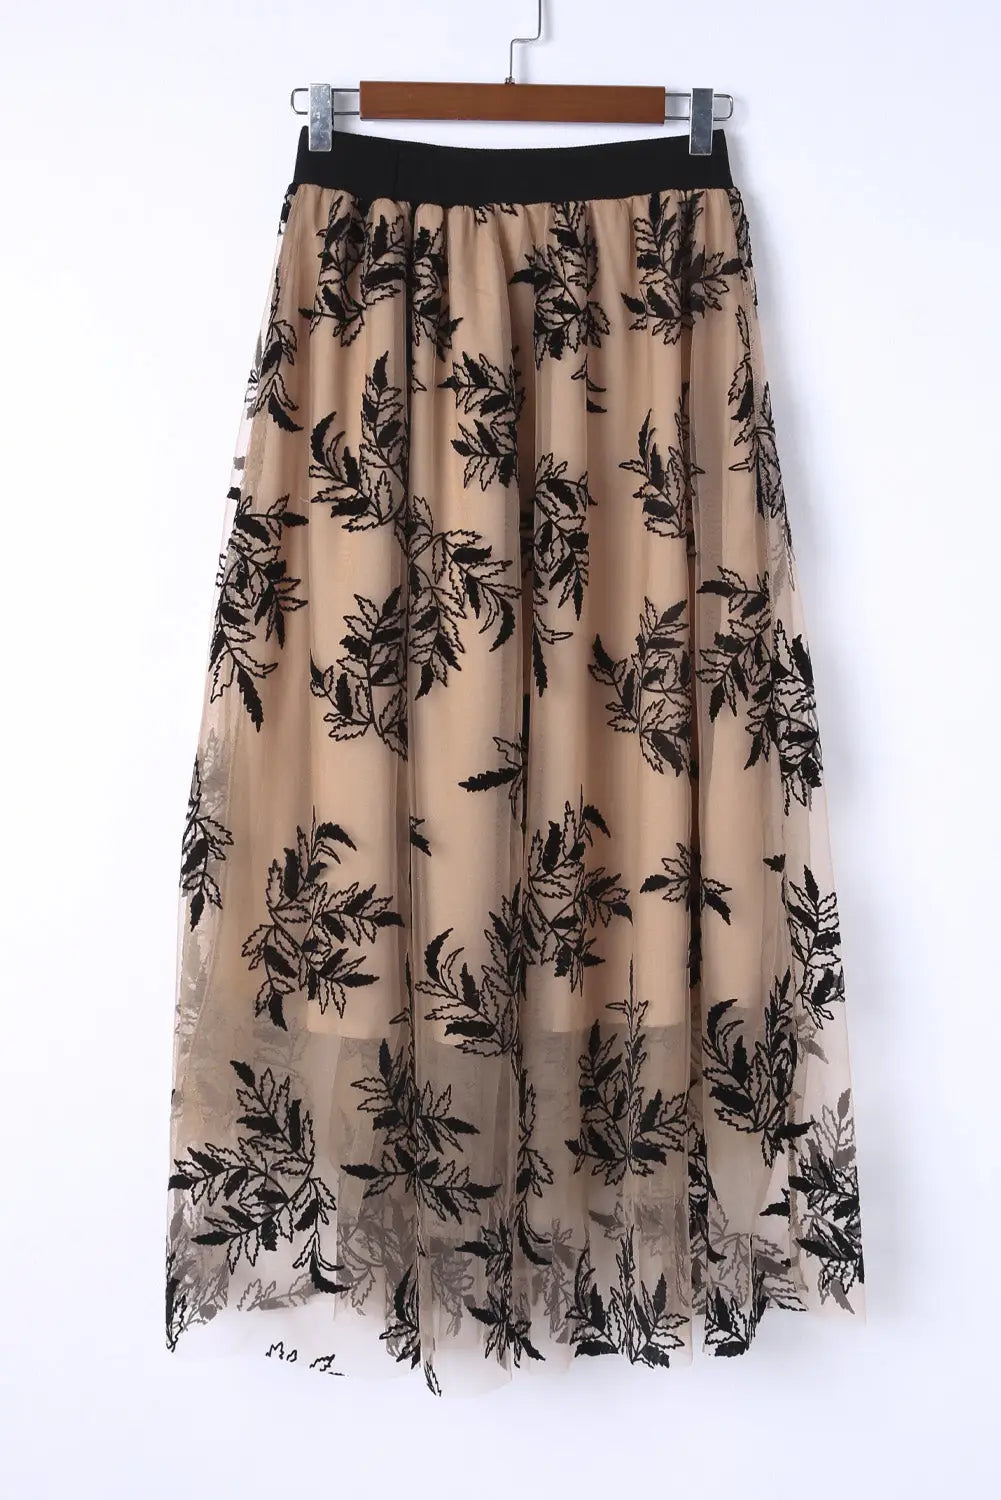 Apricot floral leaves embroidered high waist maxi skirt